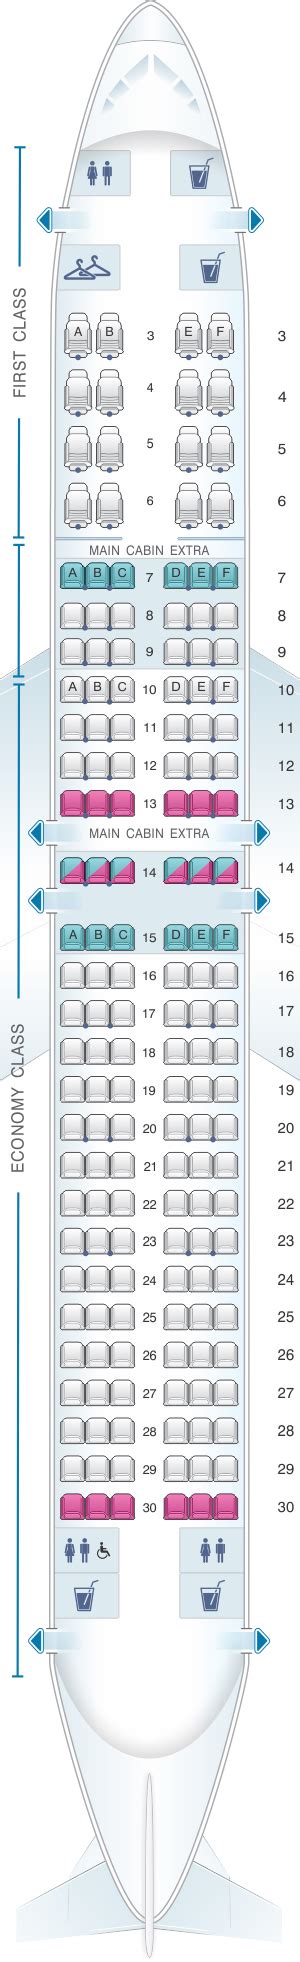 Overview. LATAM flies the Boeing 787-8 Dreamliner with 247 seats in a two-class configuration of Business and Economy. The aircraft is configured with 30 Premium Business Class seats that transform into 72 inch long beads and 217 standard Economy Class seats.. 